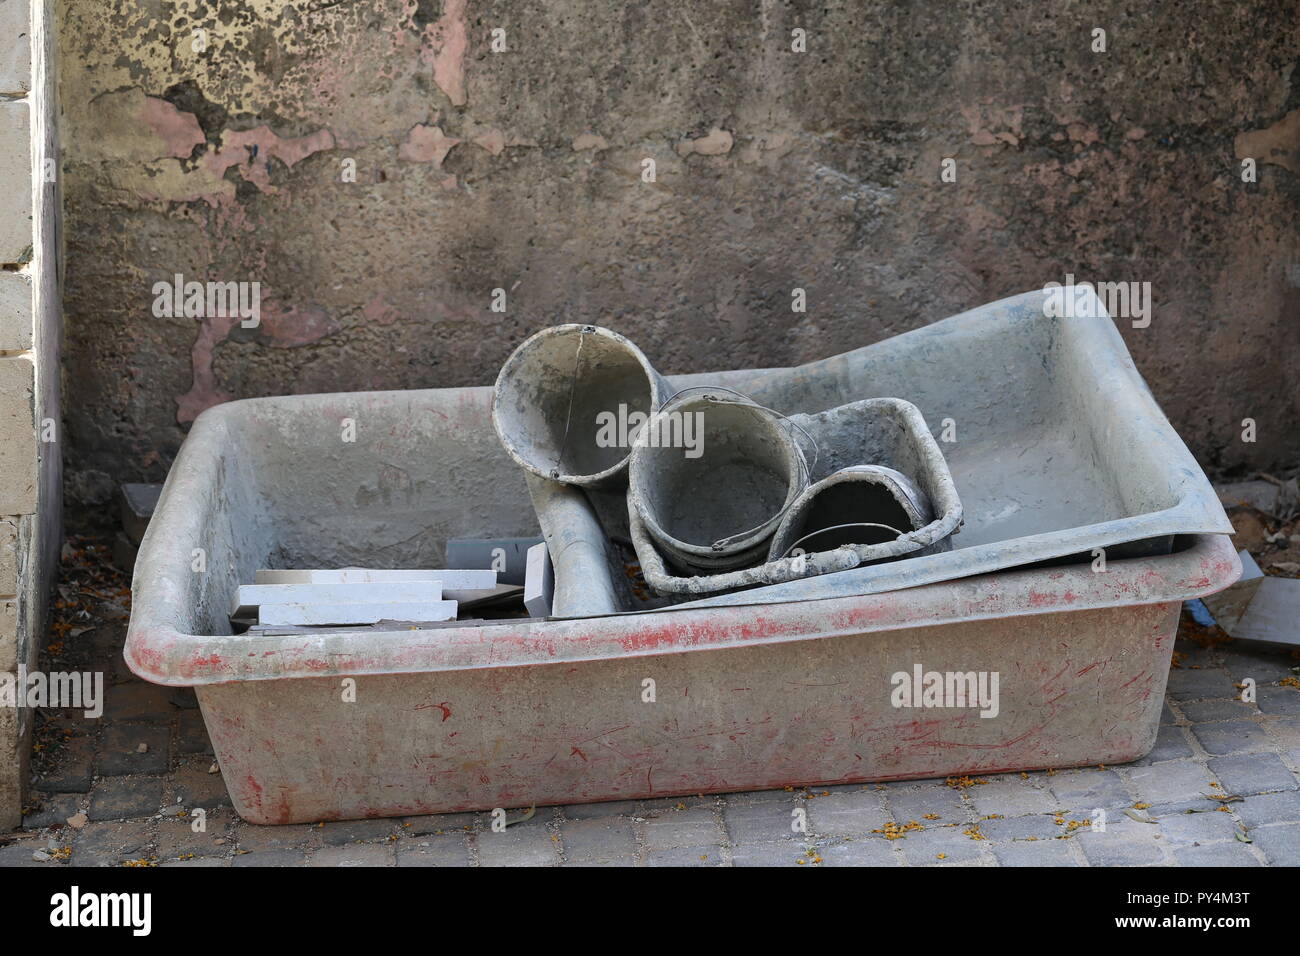 Used Buckets And Containers For Mixing Cement Left Near A Dirty Wall. Three dirty containers for mixing cement and three buckets with concrete residue Stock Photo